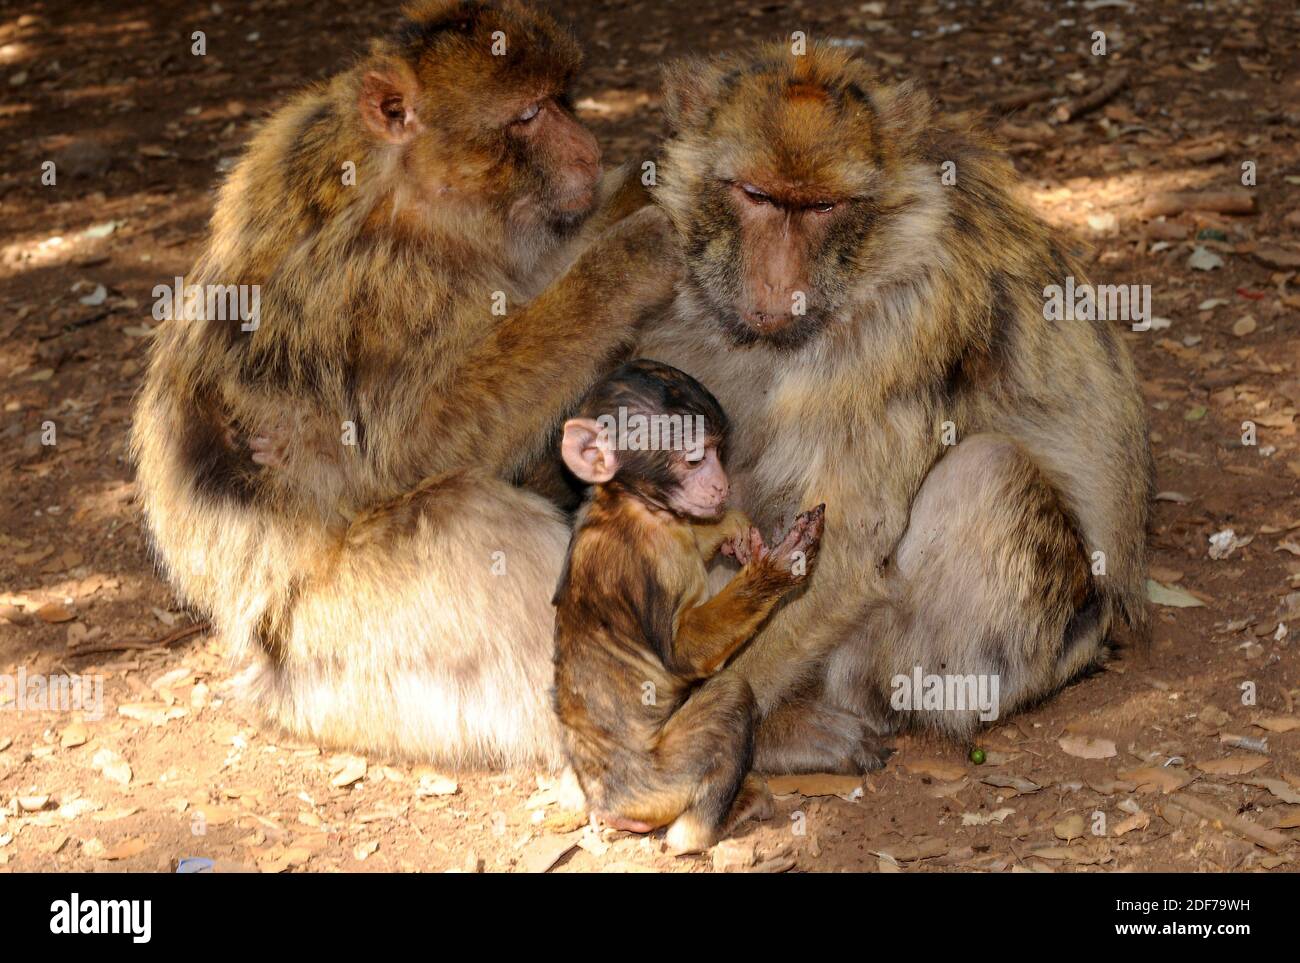 Barbary macaque (Macaca sylvanus) is a monkey native to northwestern Africa. This photo was taken in Atlas Mountains, Morocco. Stock Photo